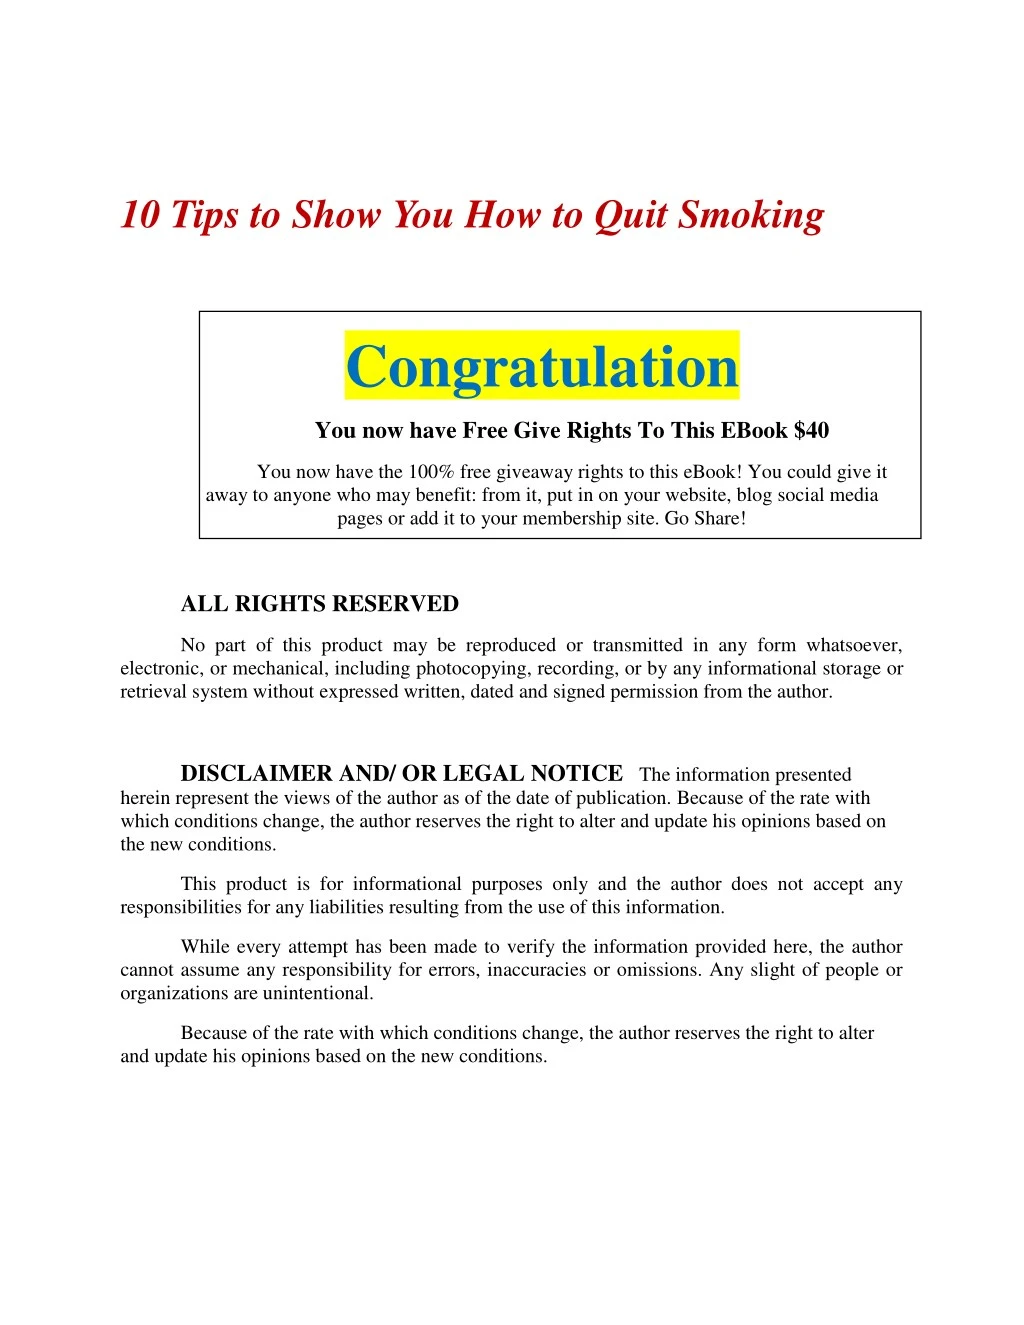 10 tips to show you how to quit smoking